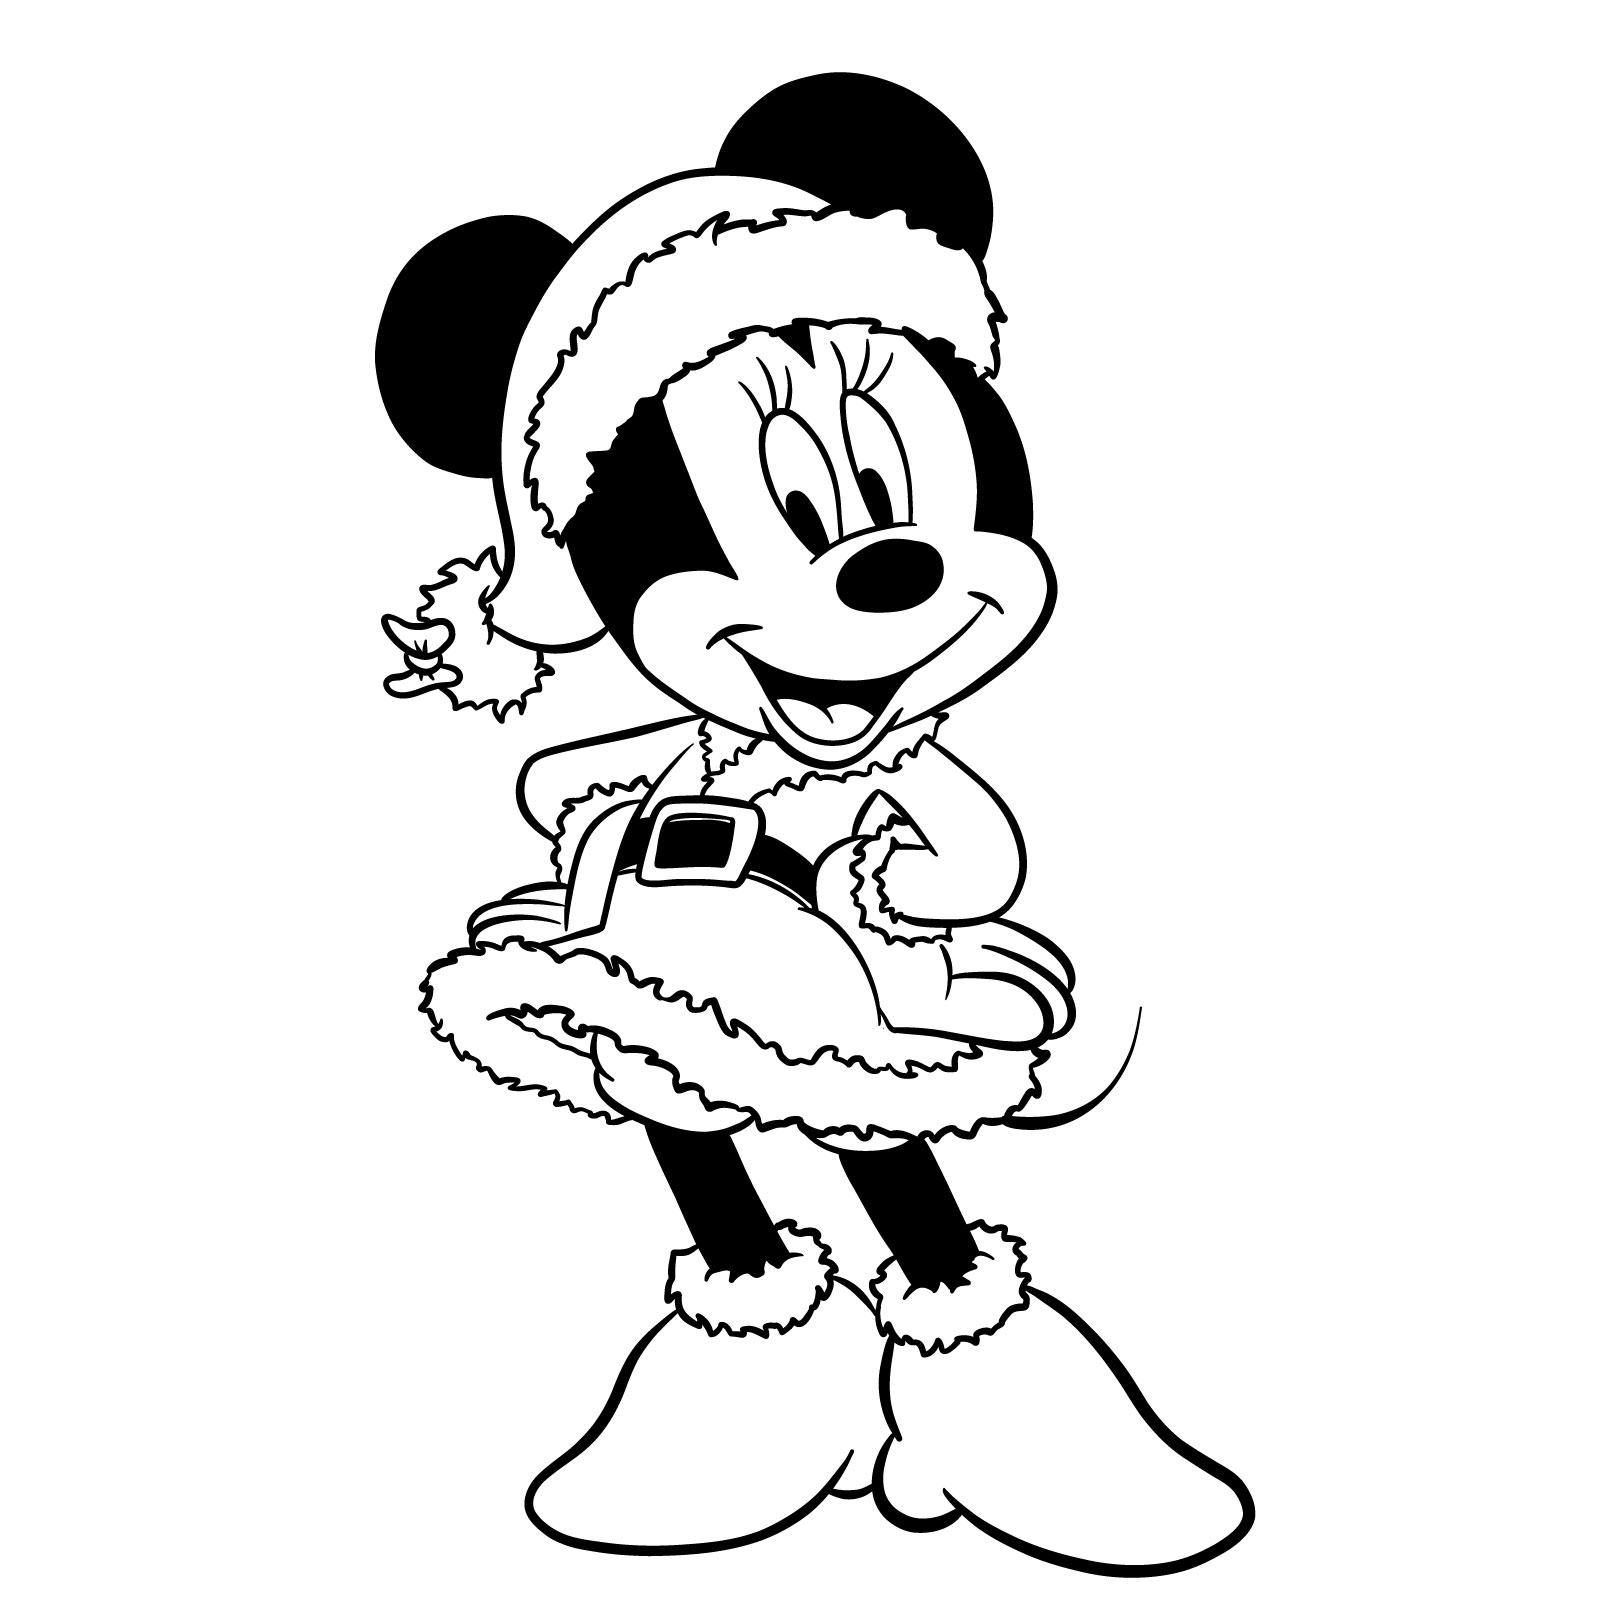 How to draw Minnie in a Christmas dress - step 34